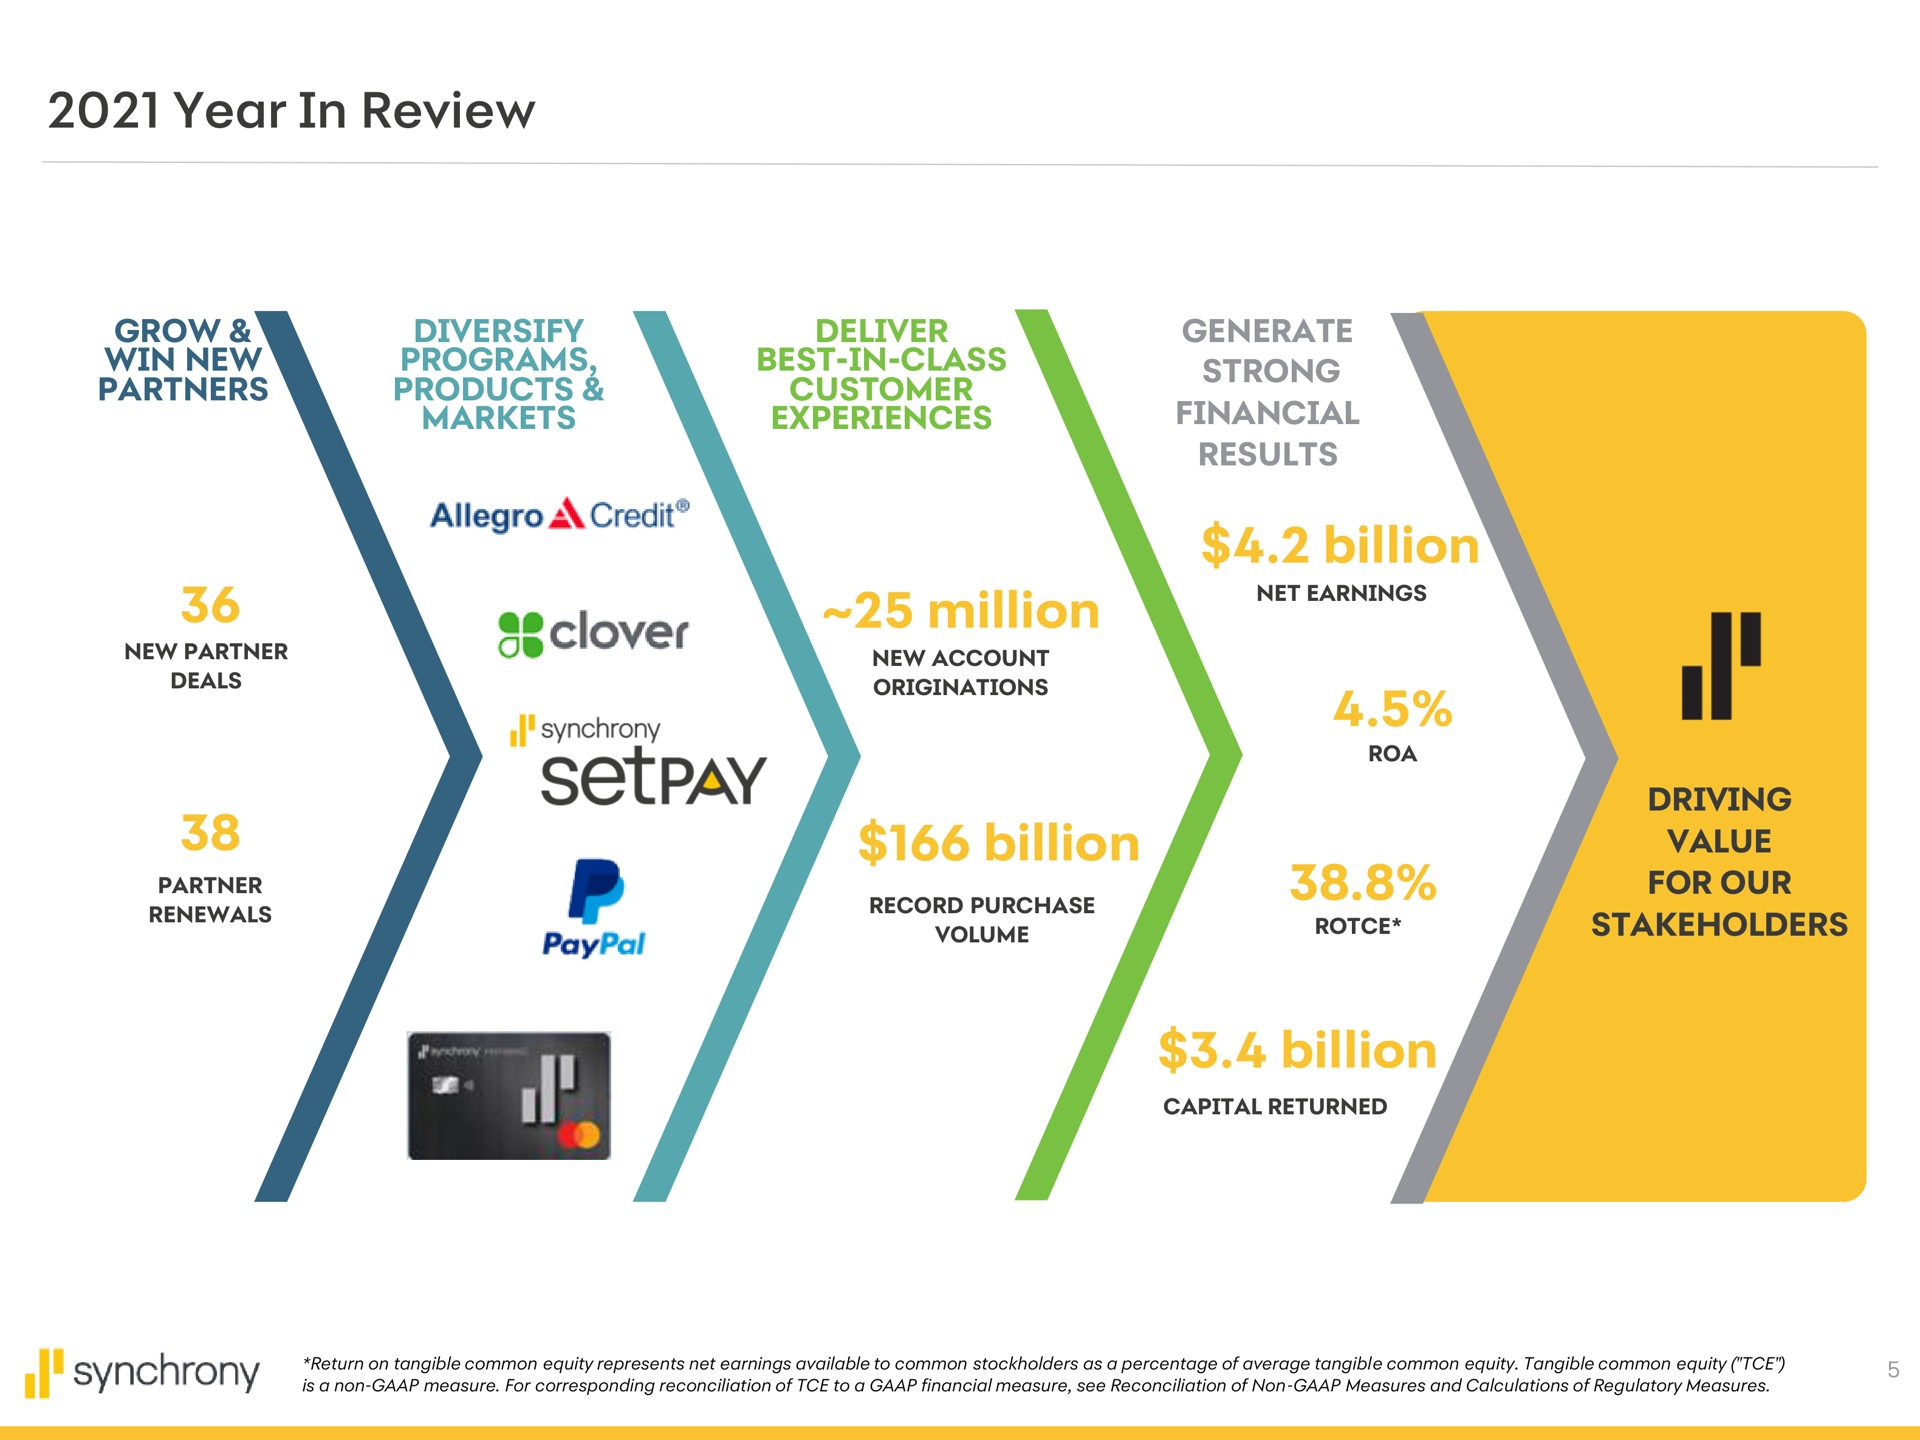 year in review million billion billion billion grow win new partners diversify programs products markets deliver best in class customer experiences allegro a credit clover generate strong financial results wees | Synchrony Financial